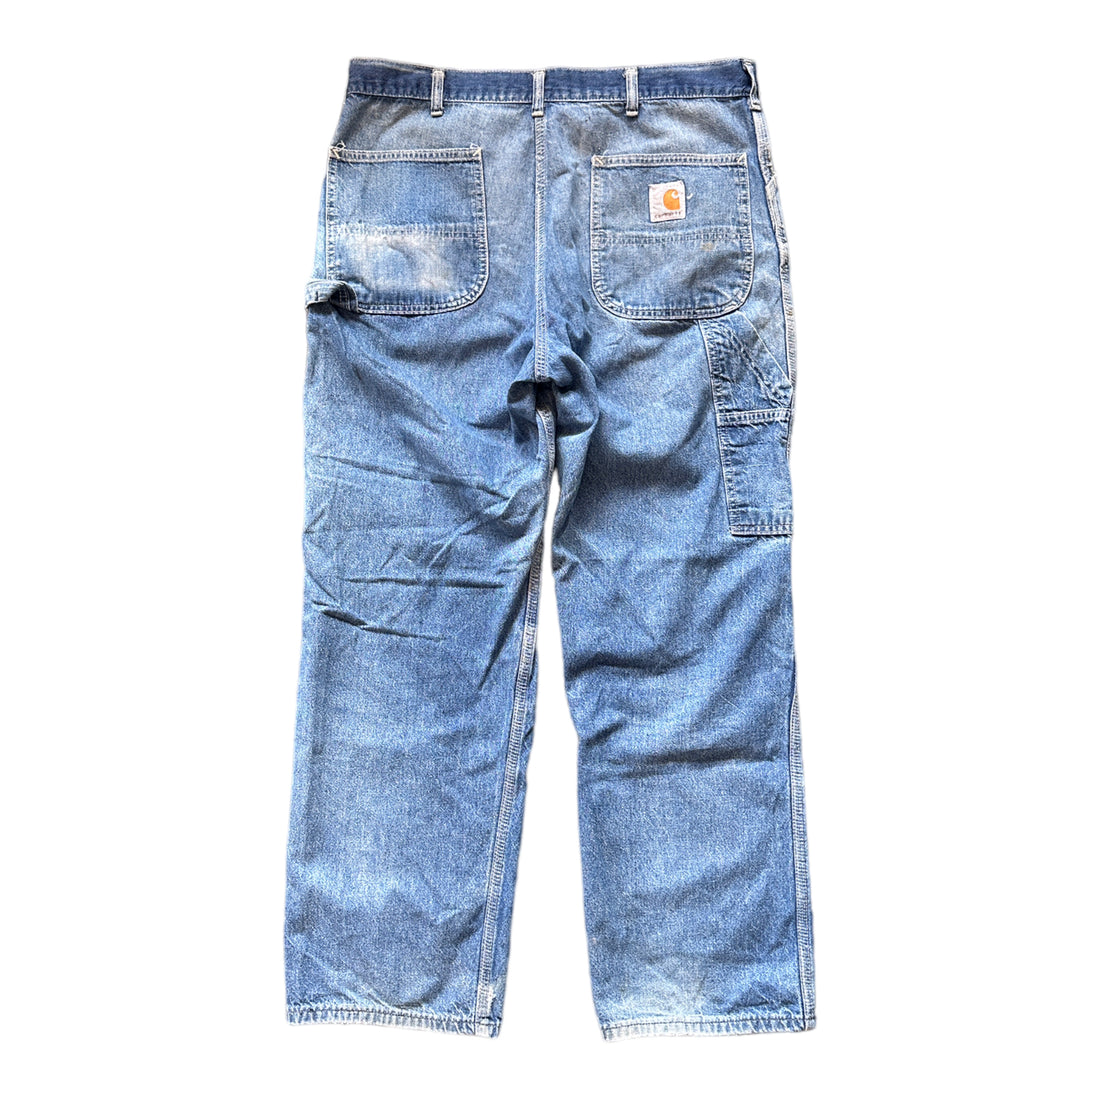 UNION MADE CARHARTT THRASHED BLUE JEANS ‘34X28’ - 1980S